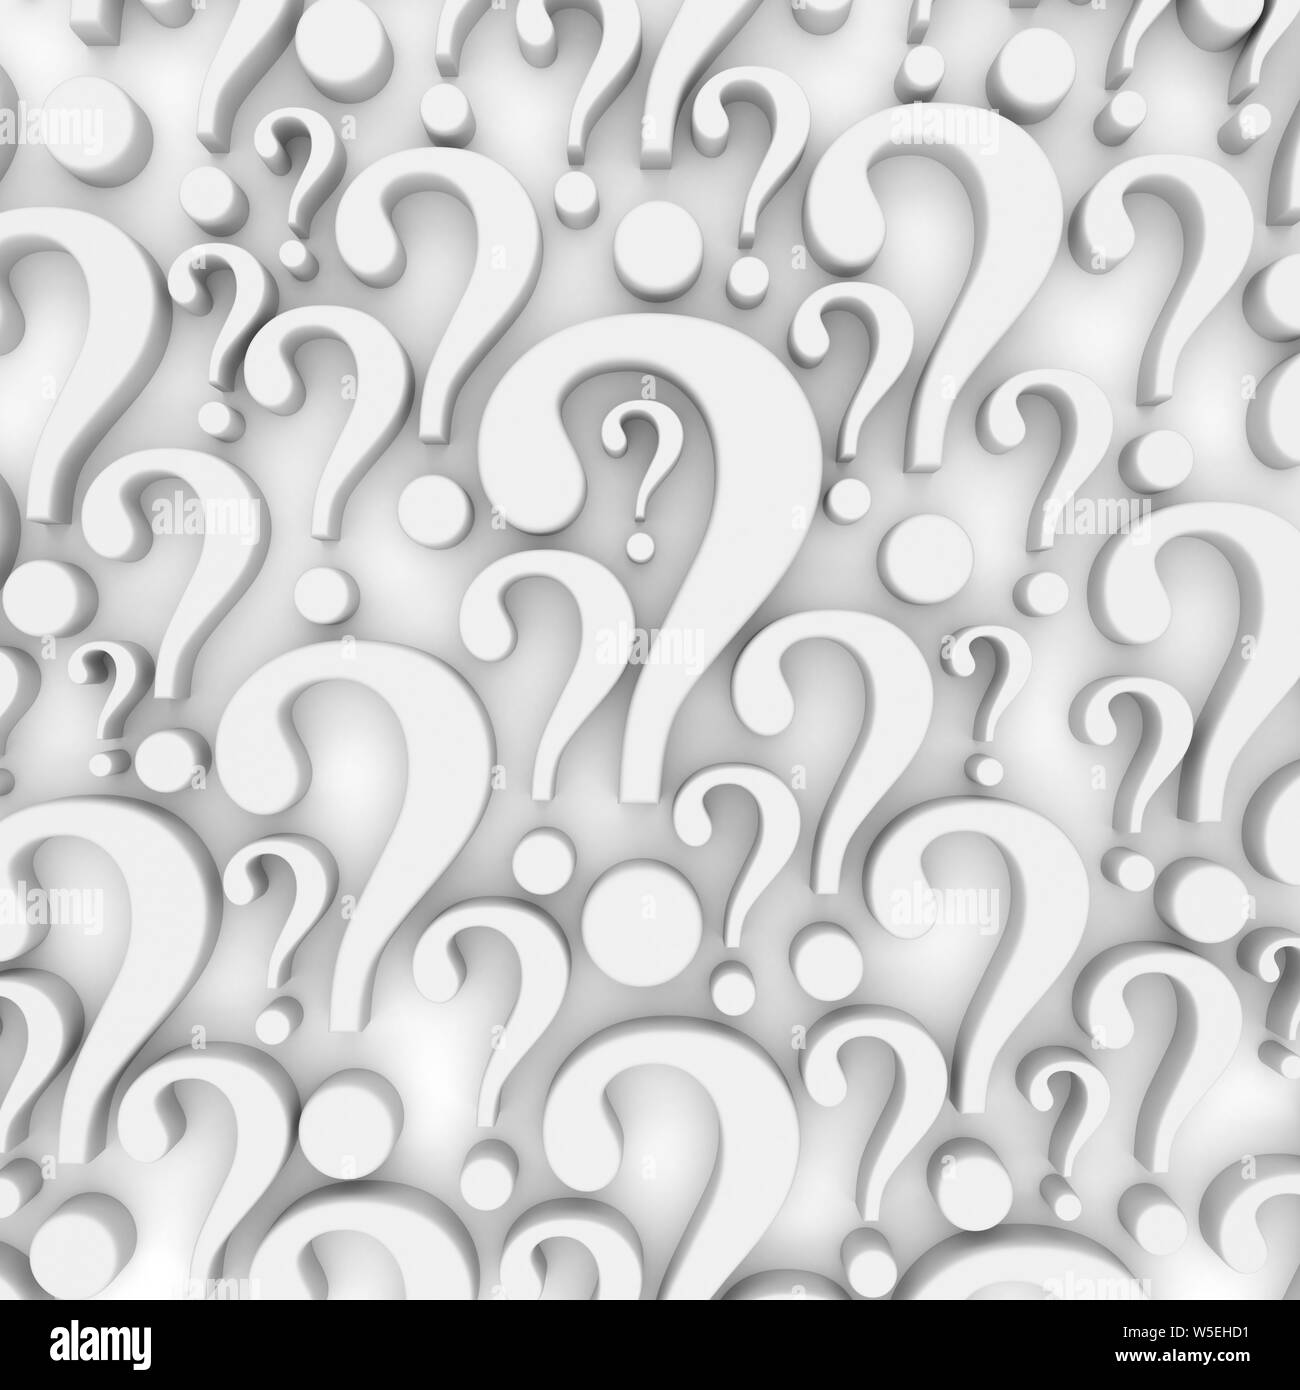 Question mark background - 3d render Stock Photo